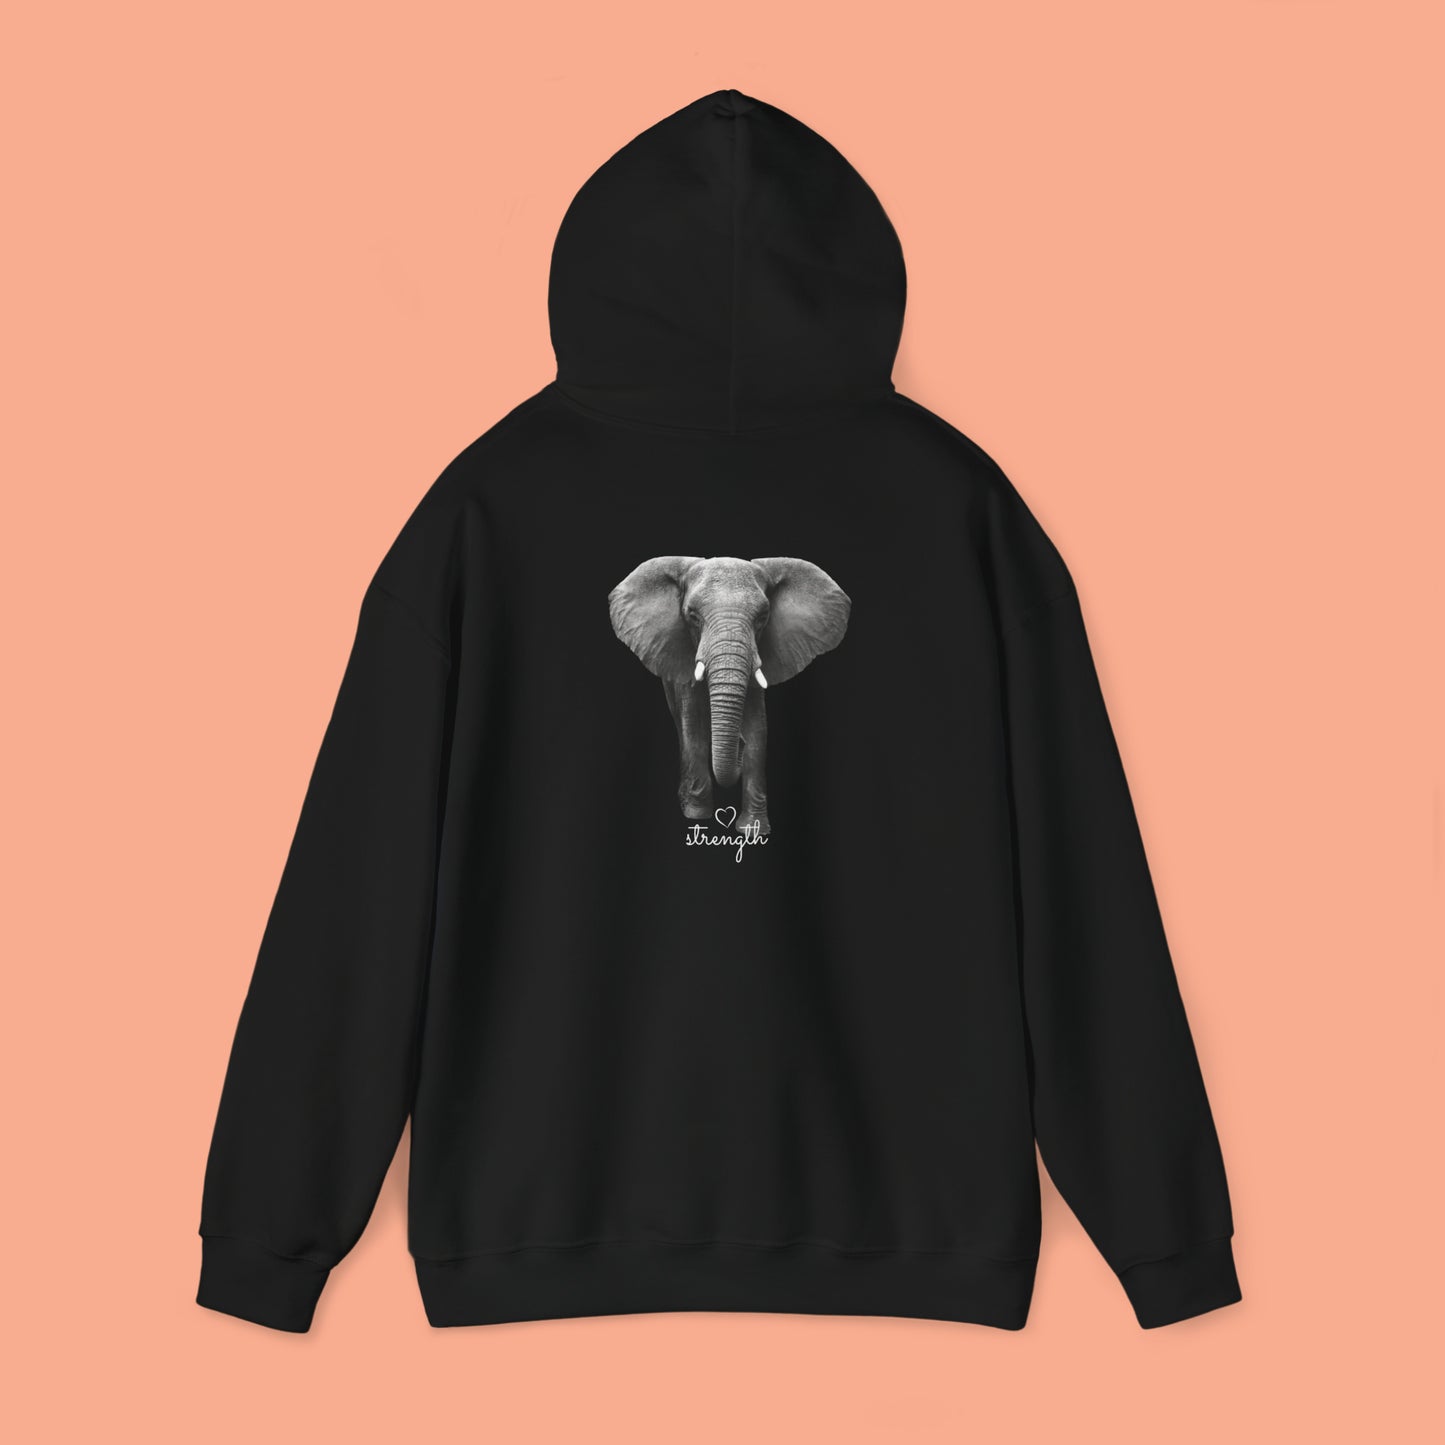 Love elephants? Then this Unisex Heavy Blend™ Hooded Sweatshirt is perfect for you!